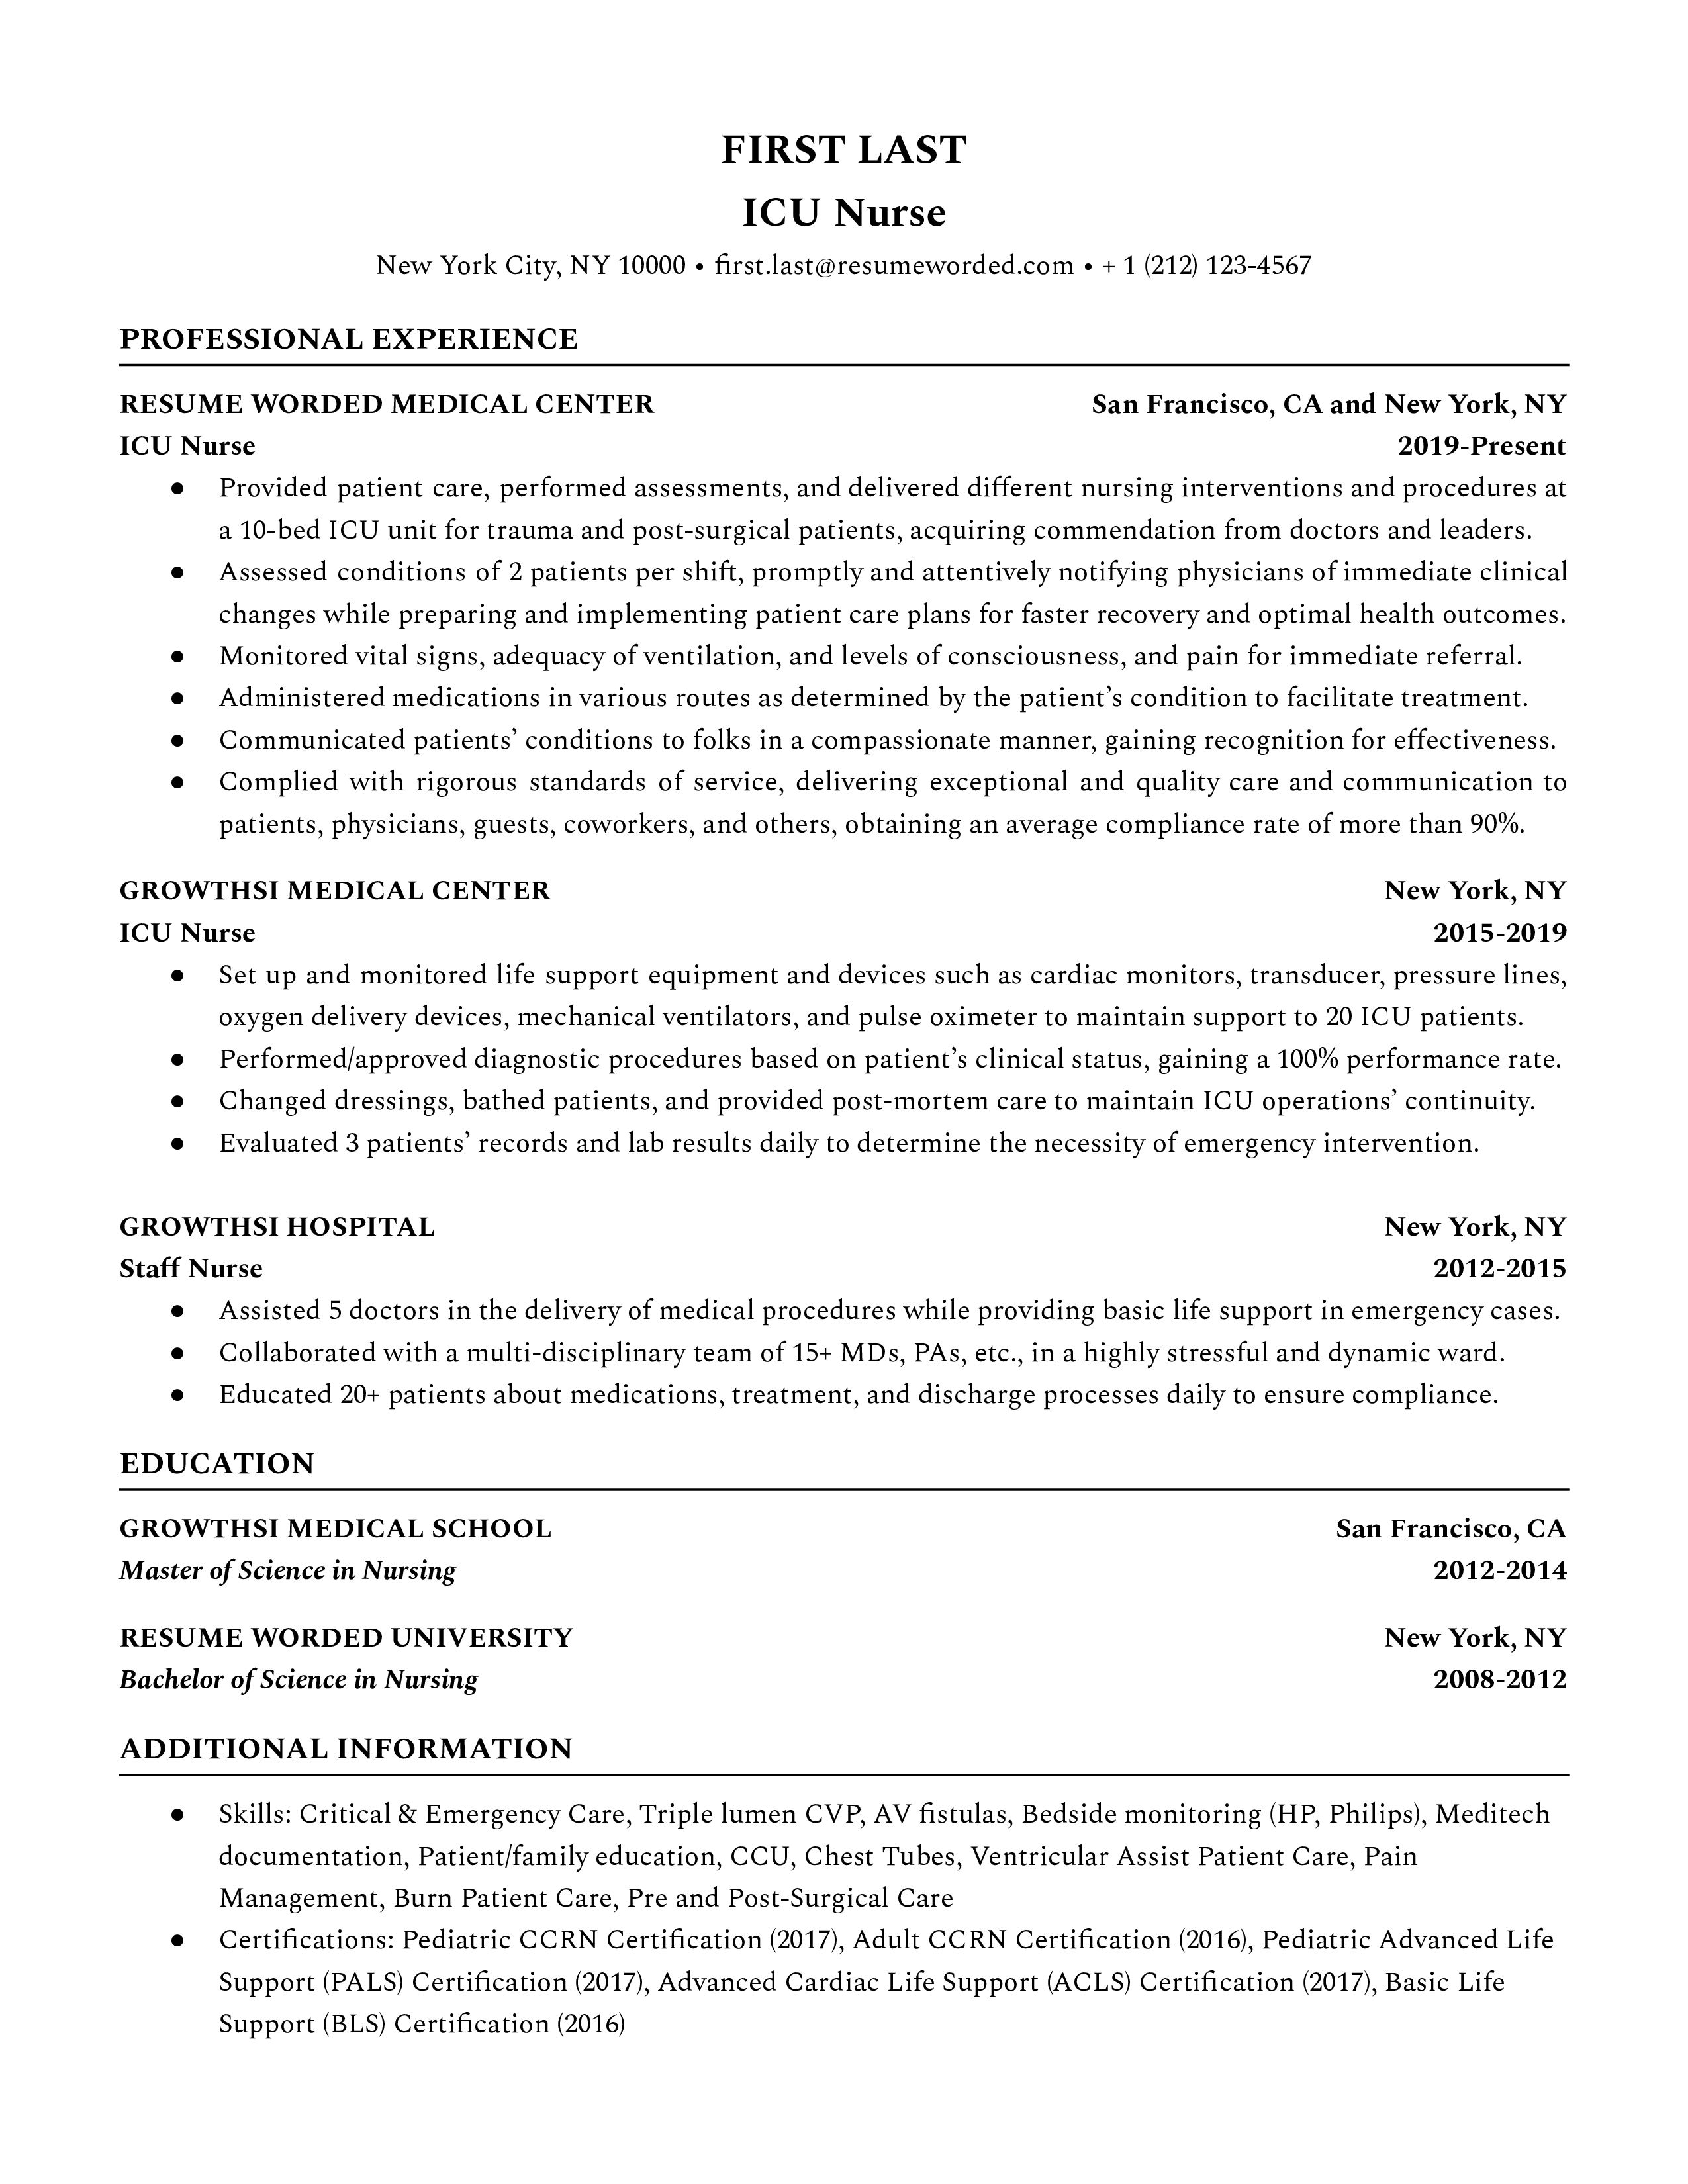 A sample CV for an ICU nurse role focused on technology proficiency and handling high-pressure situations.